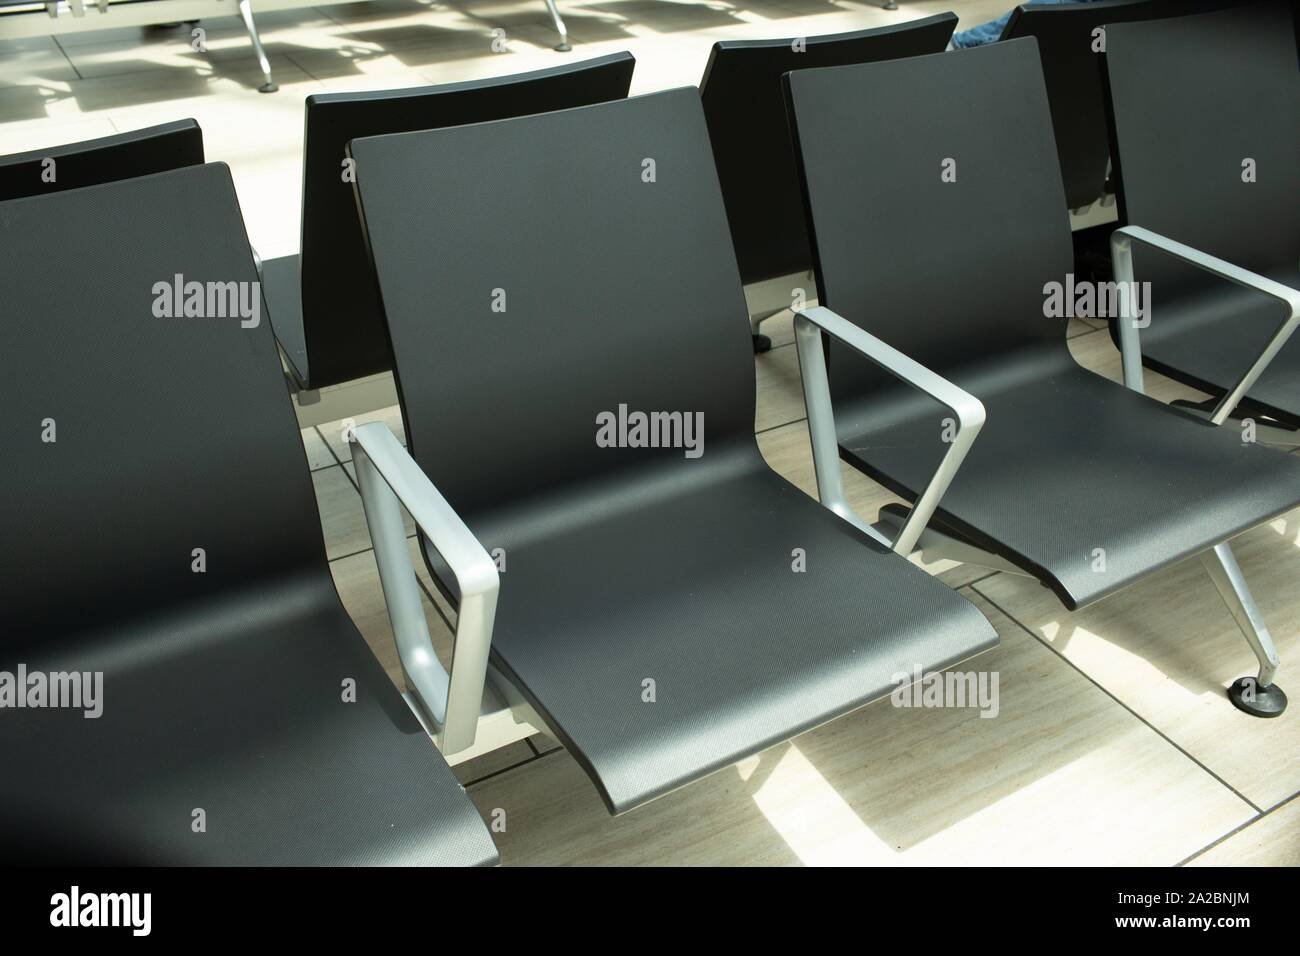 Empty chairs in an airport terminal. Stock Photo